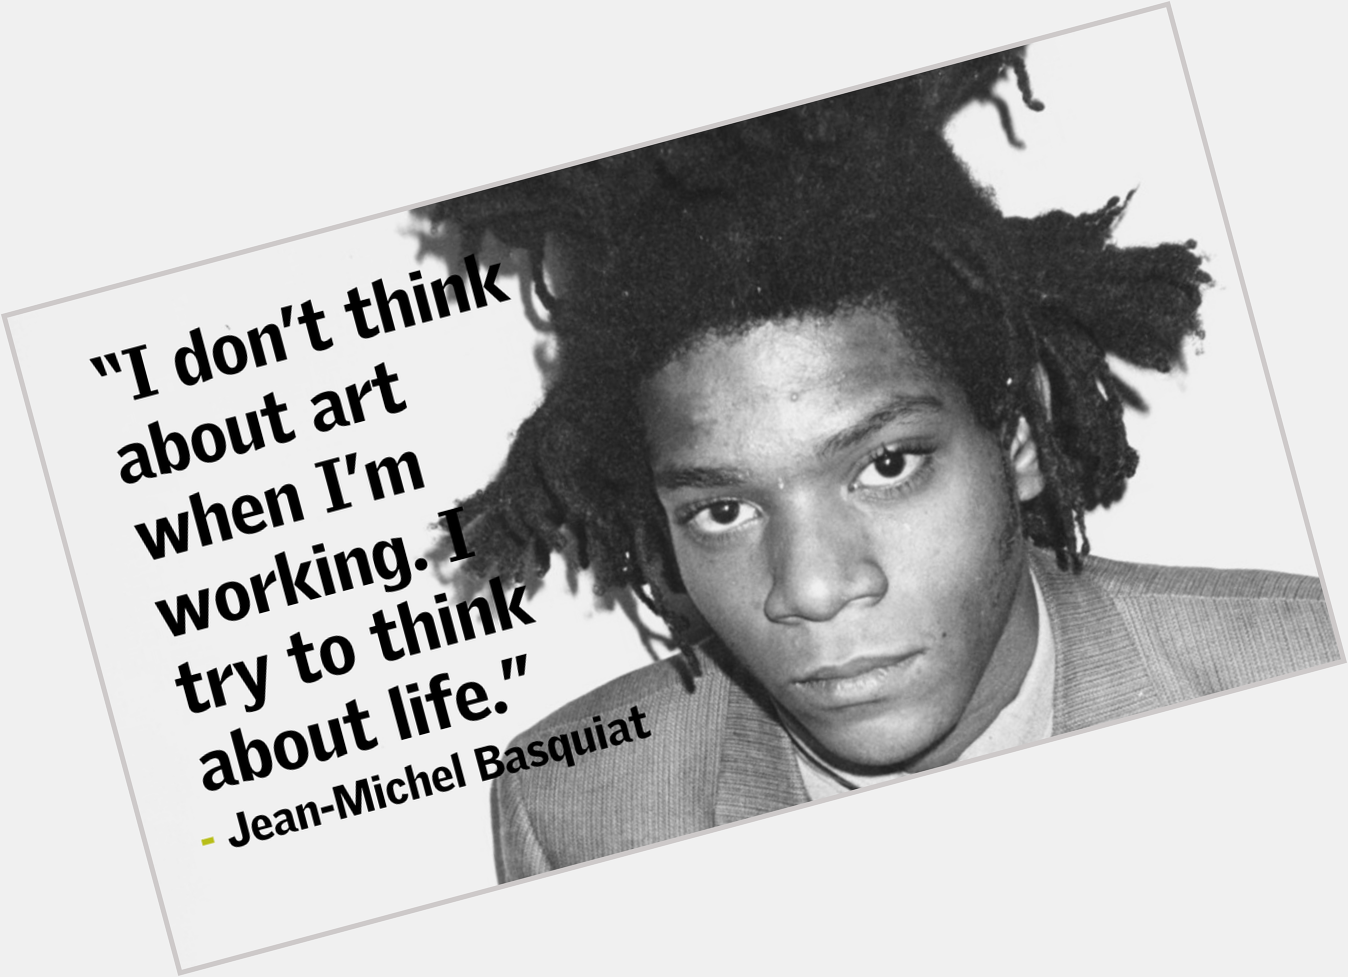 Happy Birthday to Jean-Michel Basquiat, whose legacy prevails through endless art and life inspiration. 